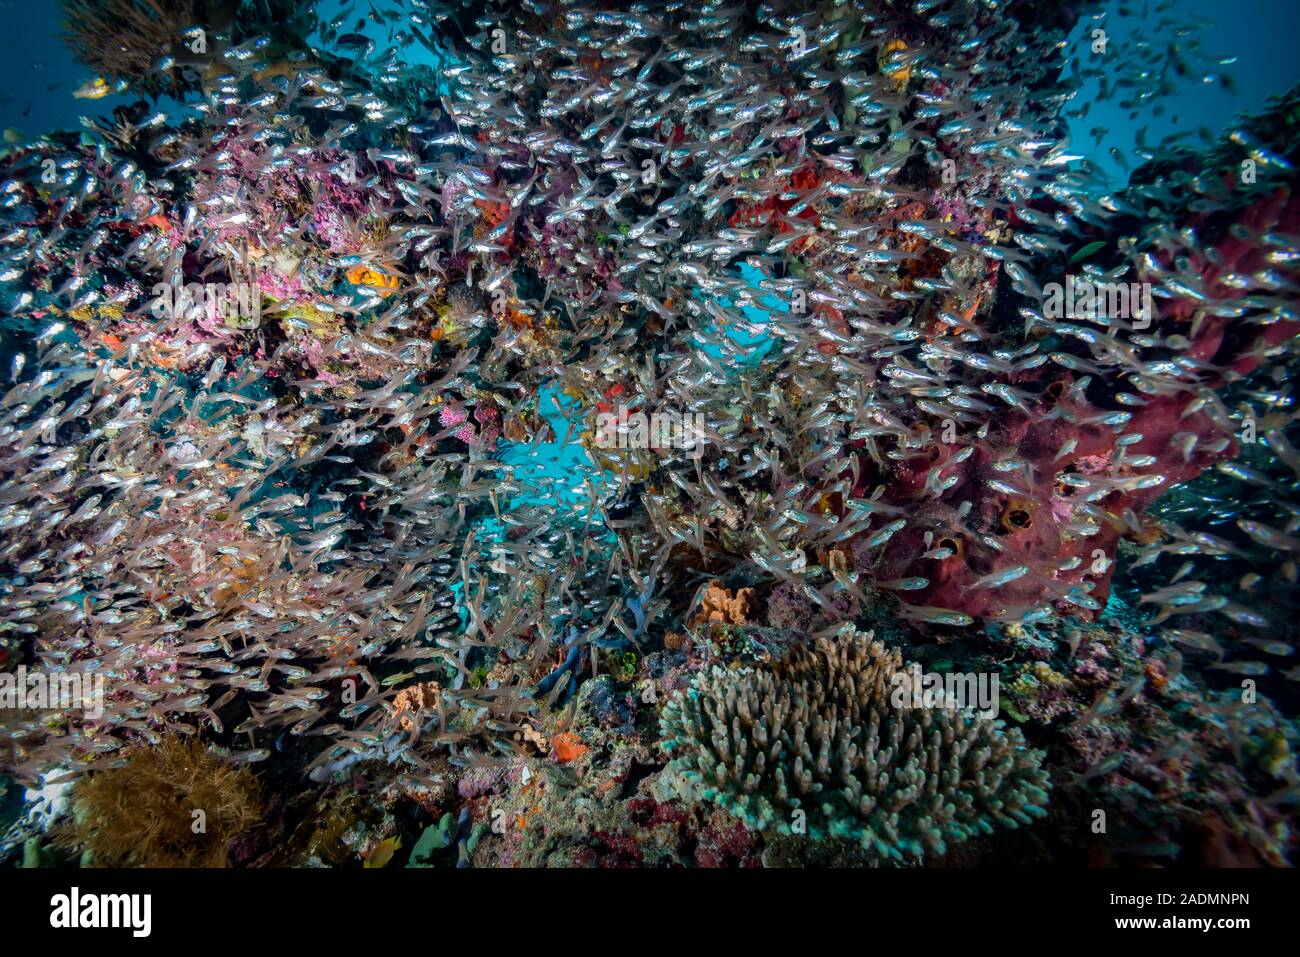 Tropical Coral Reef Underwater Indonesia Stock Photo